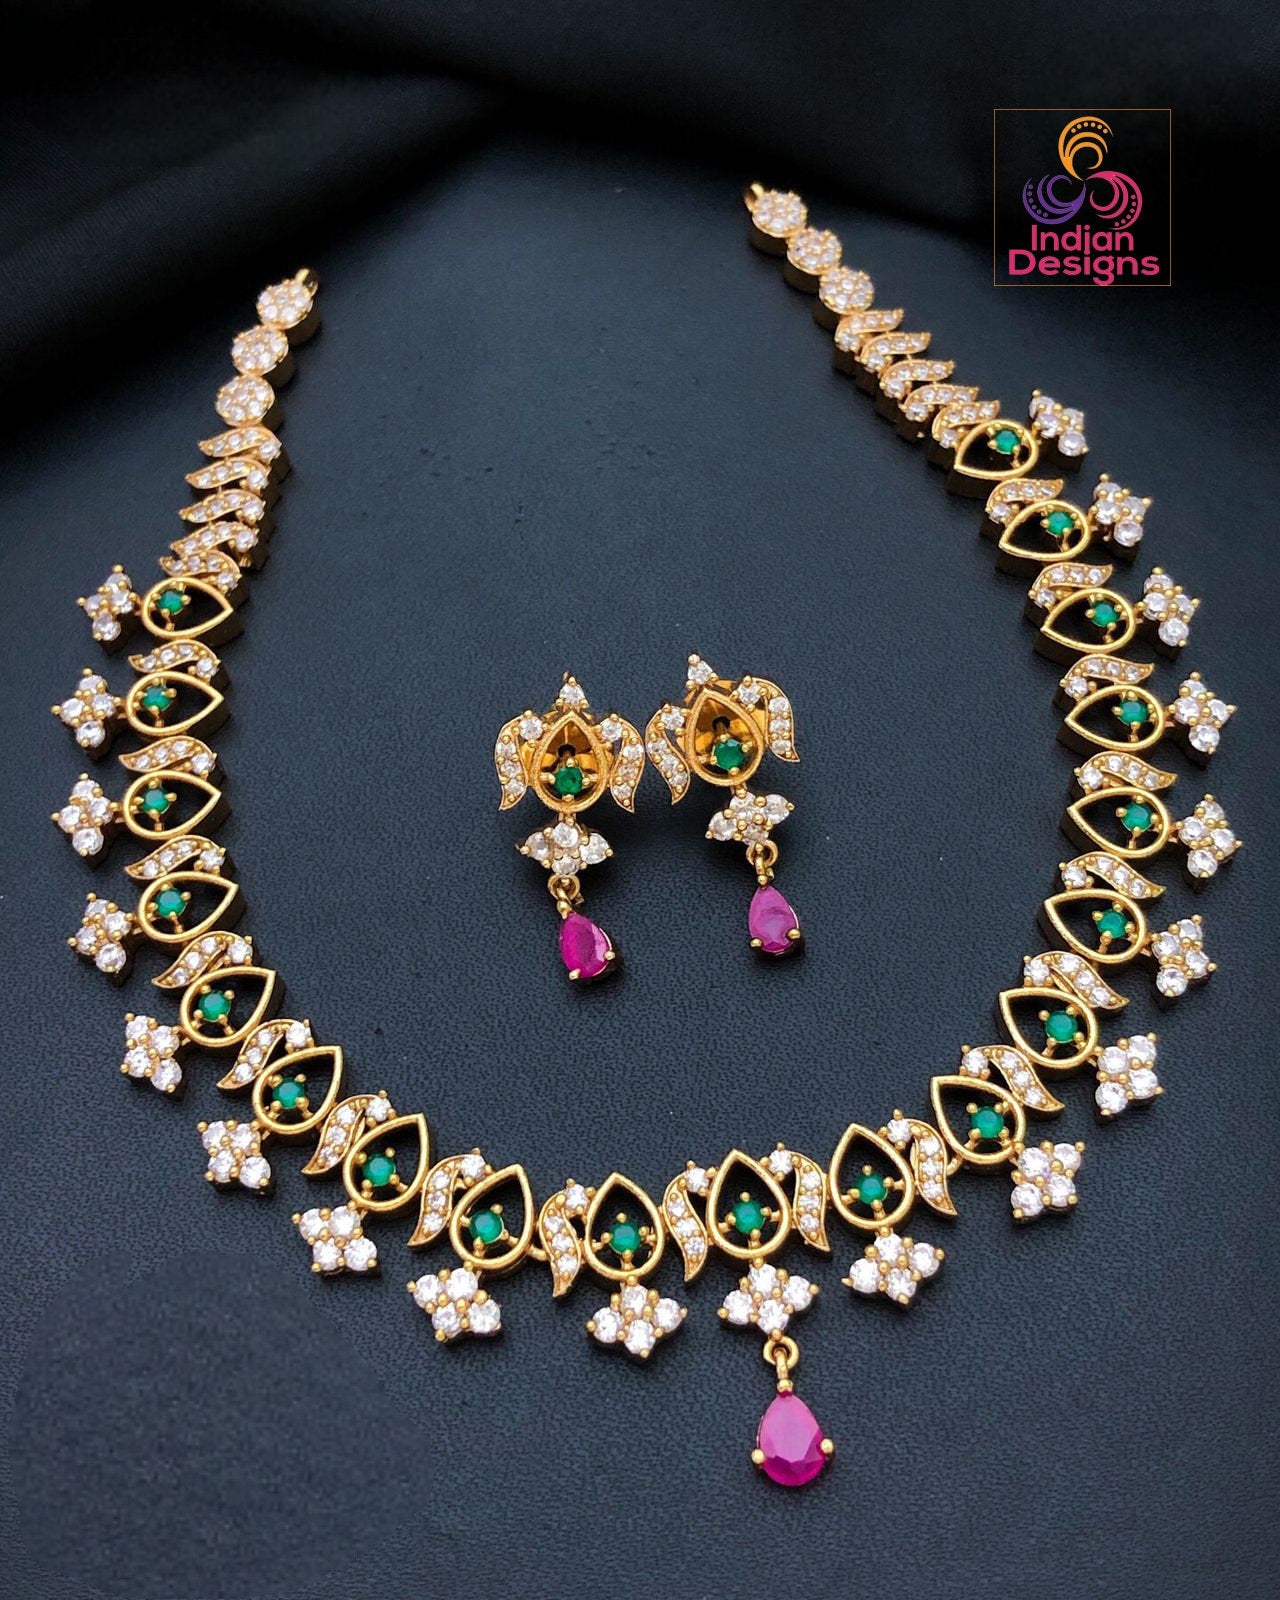 Matte Gold Finish Green & Pink American Diamond Necklace and Earrings Set |South Indian CZ Diamond choker | Indian jewelry sets|Gift for Her